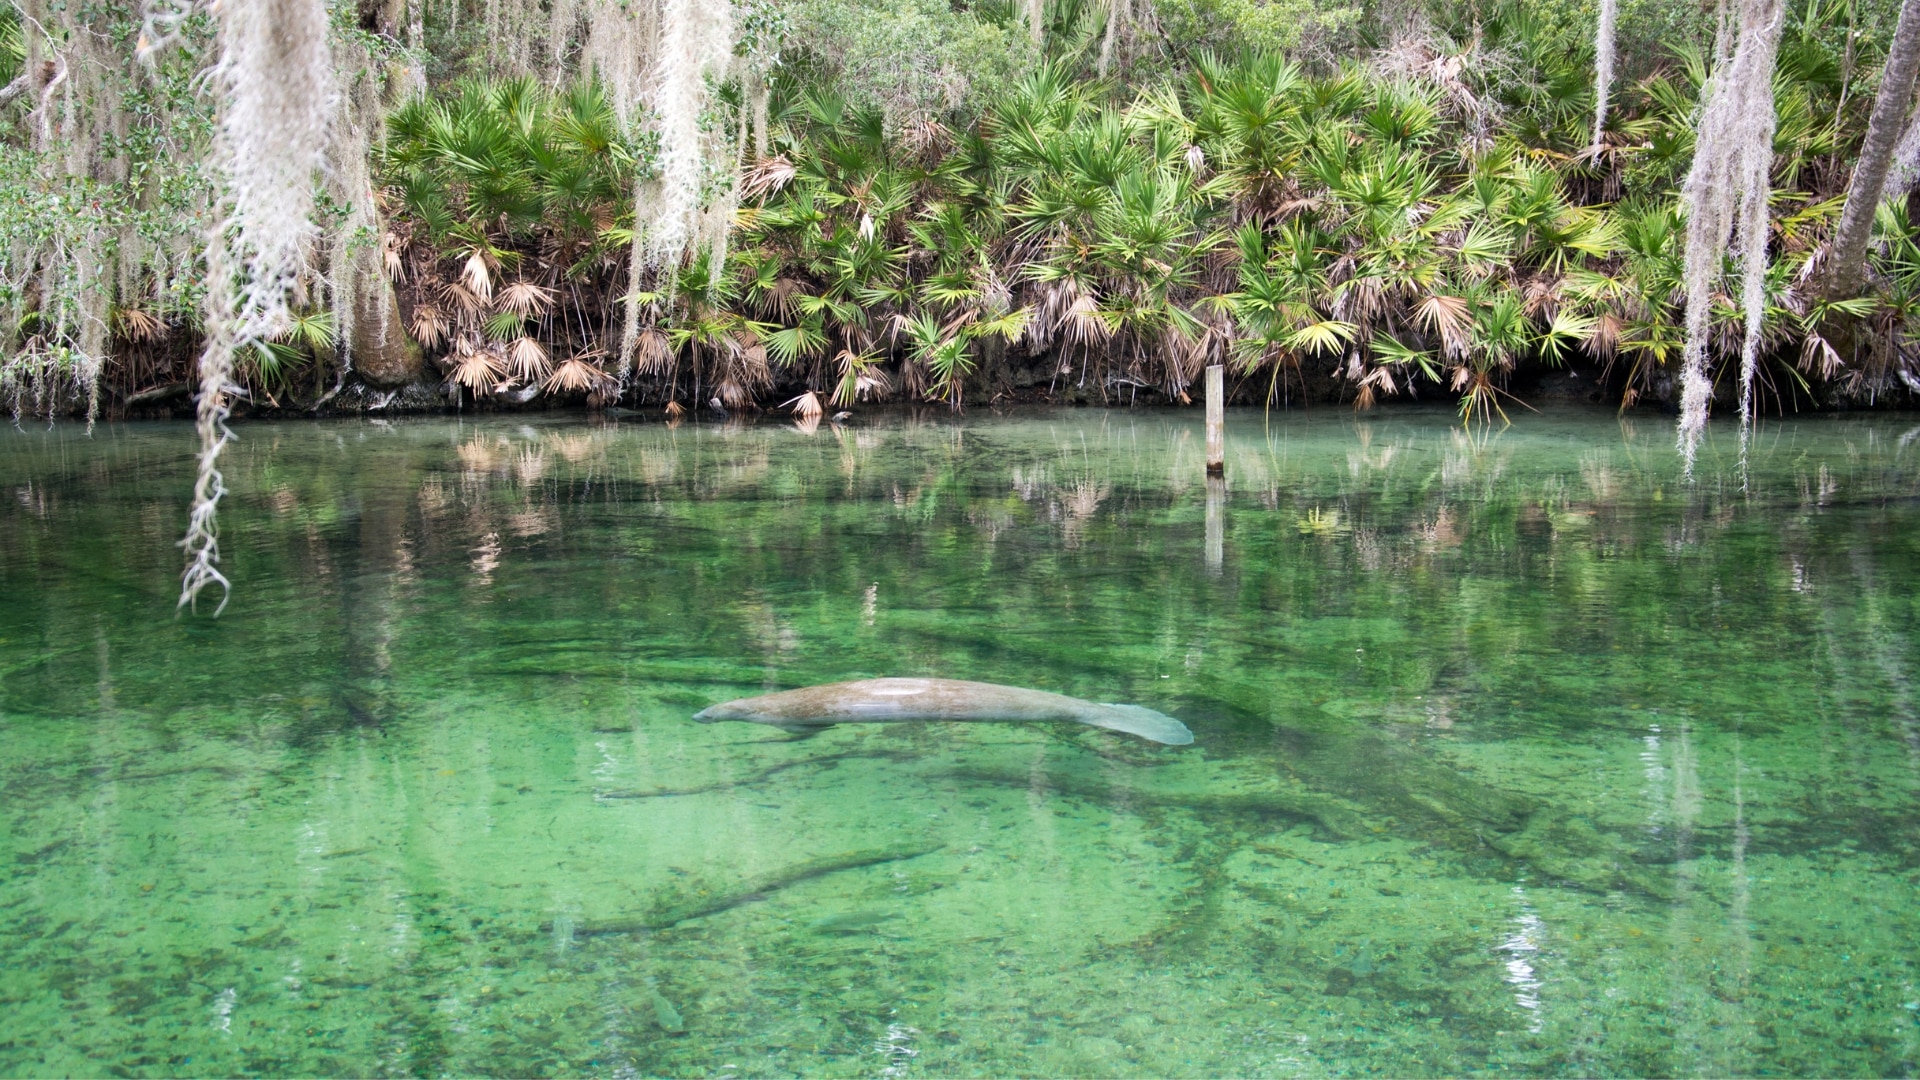 West Indian Manatee at Blue Spring State Park in Florida